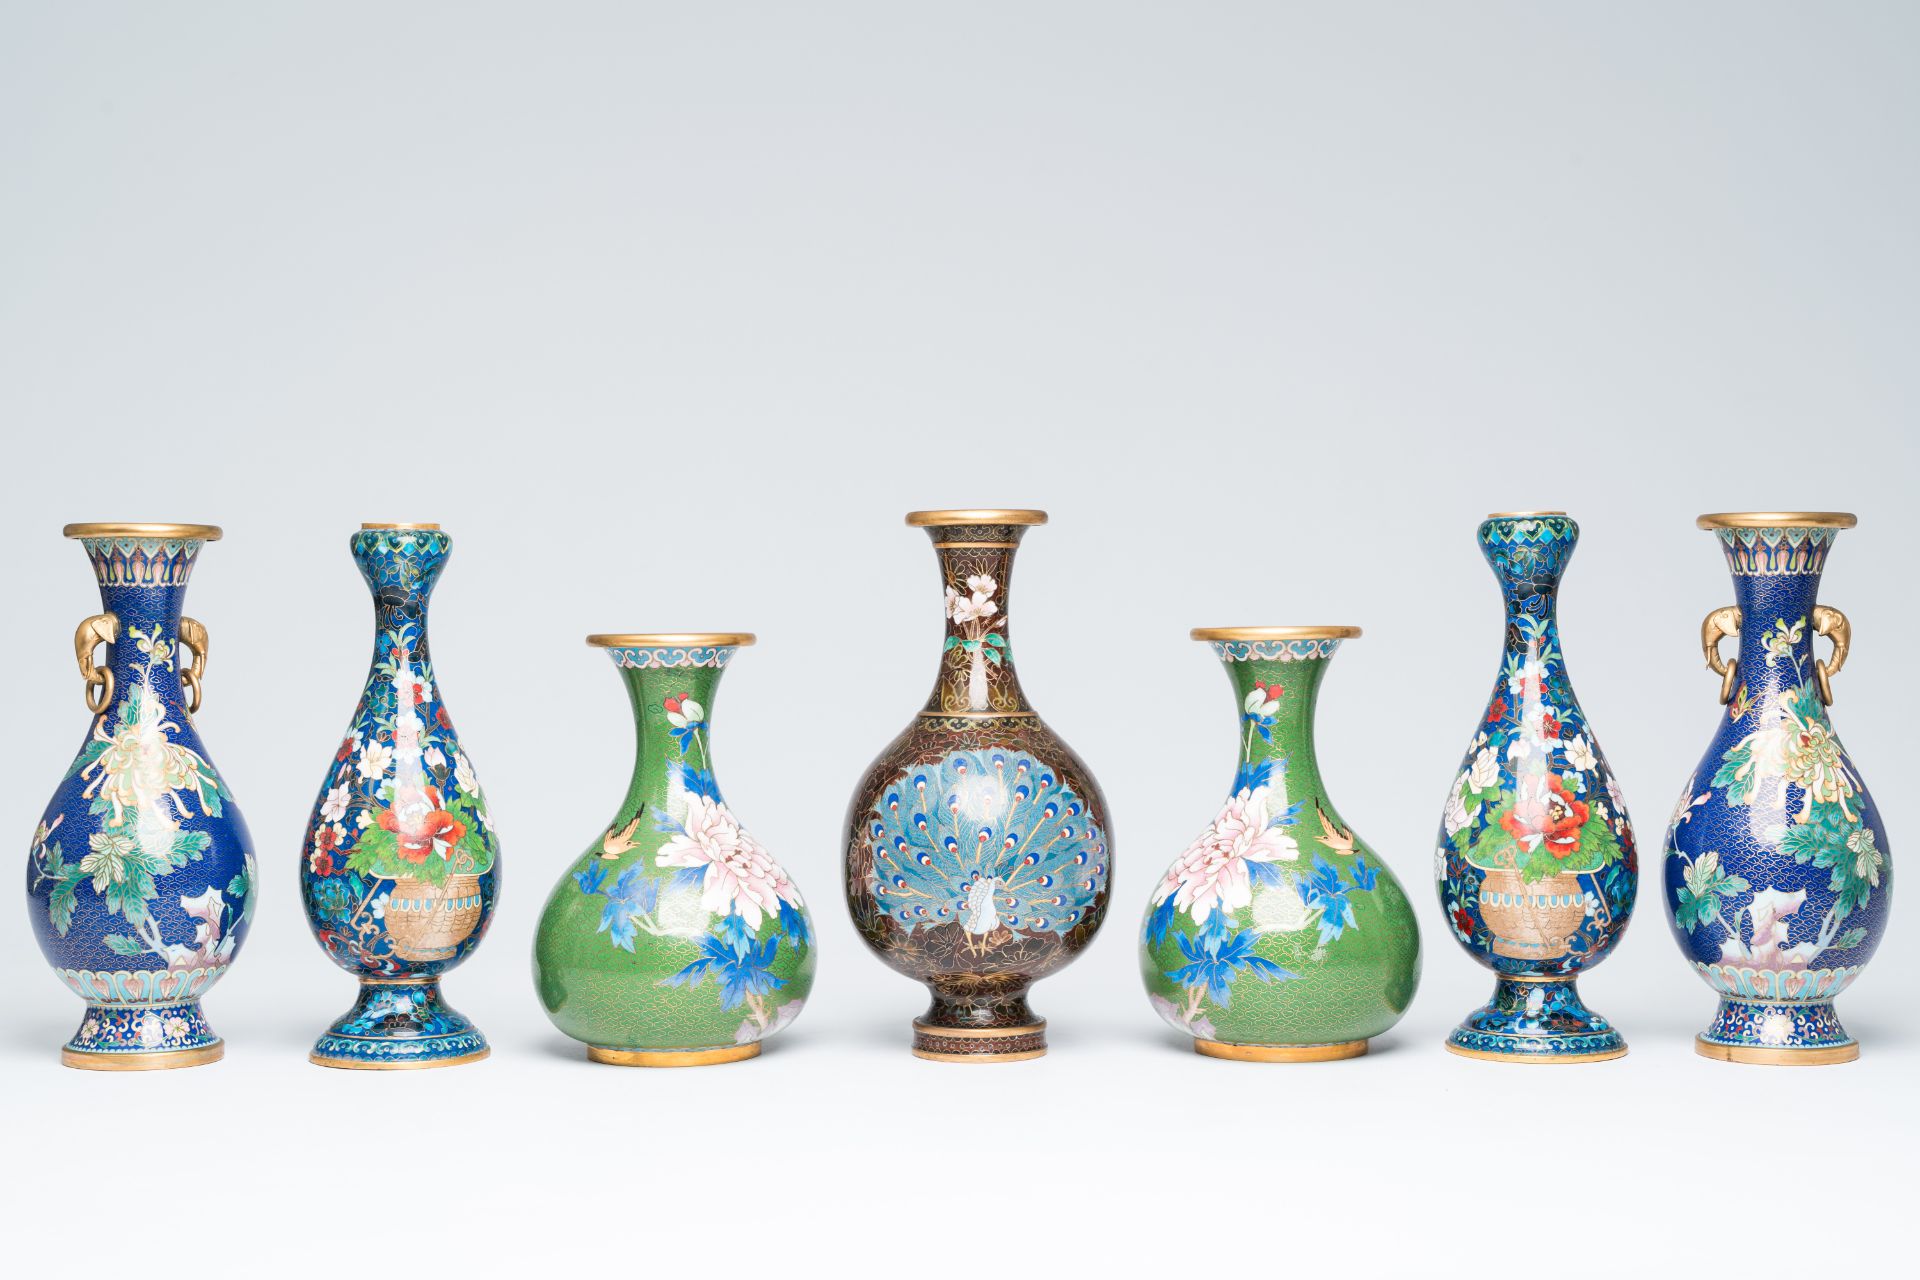 Three pairs of Chinese cloisonne vases with floral design and a 'proud peacock' vase, 20th C. - Image 2 of 9